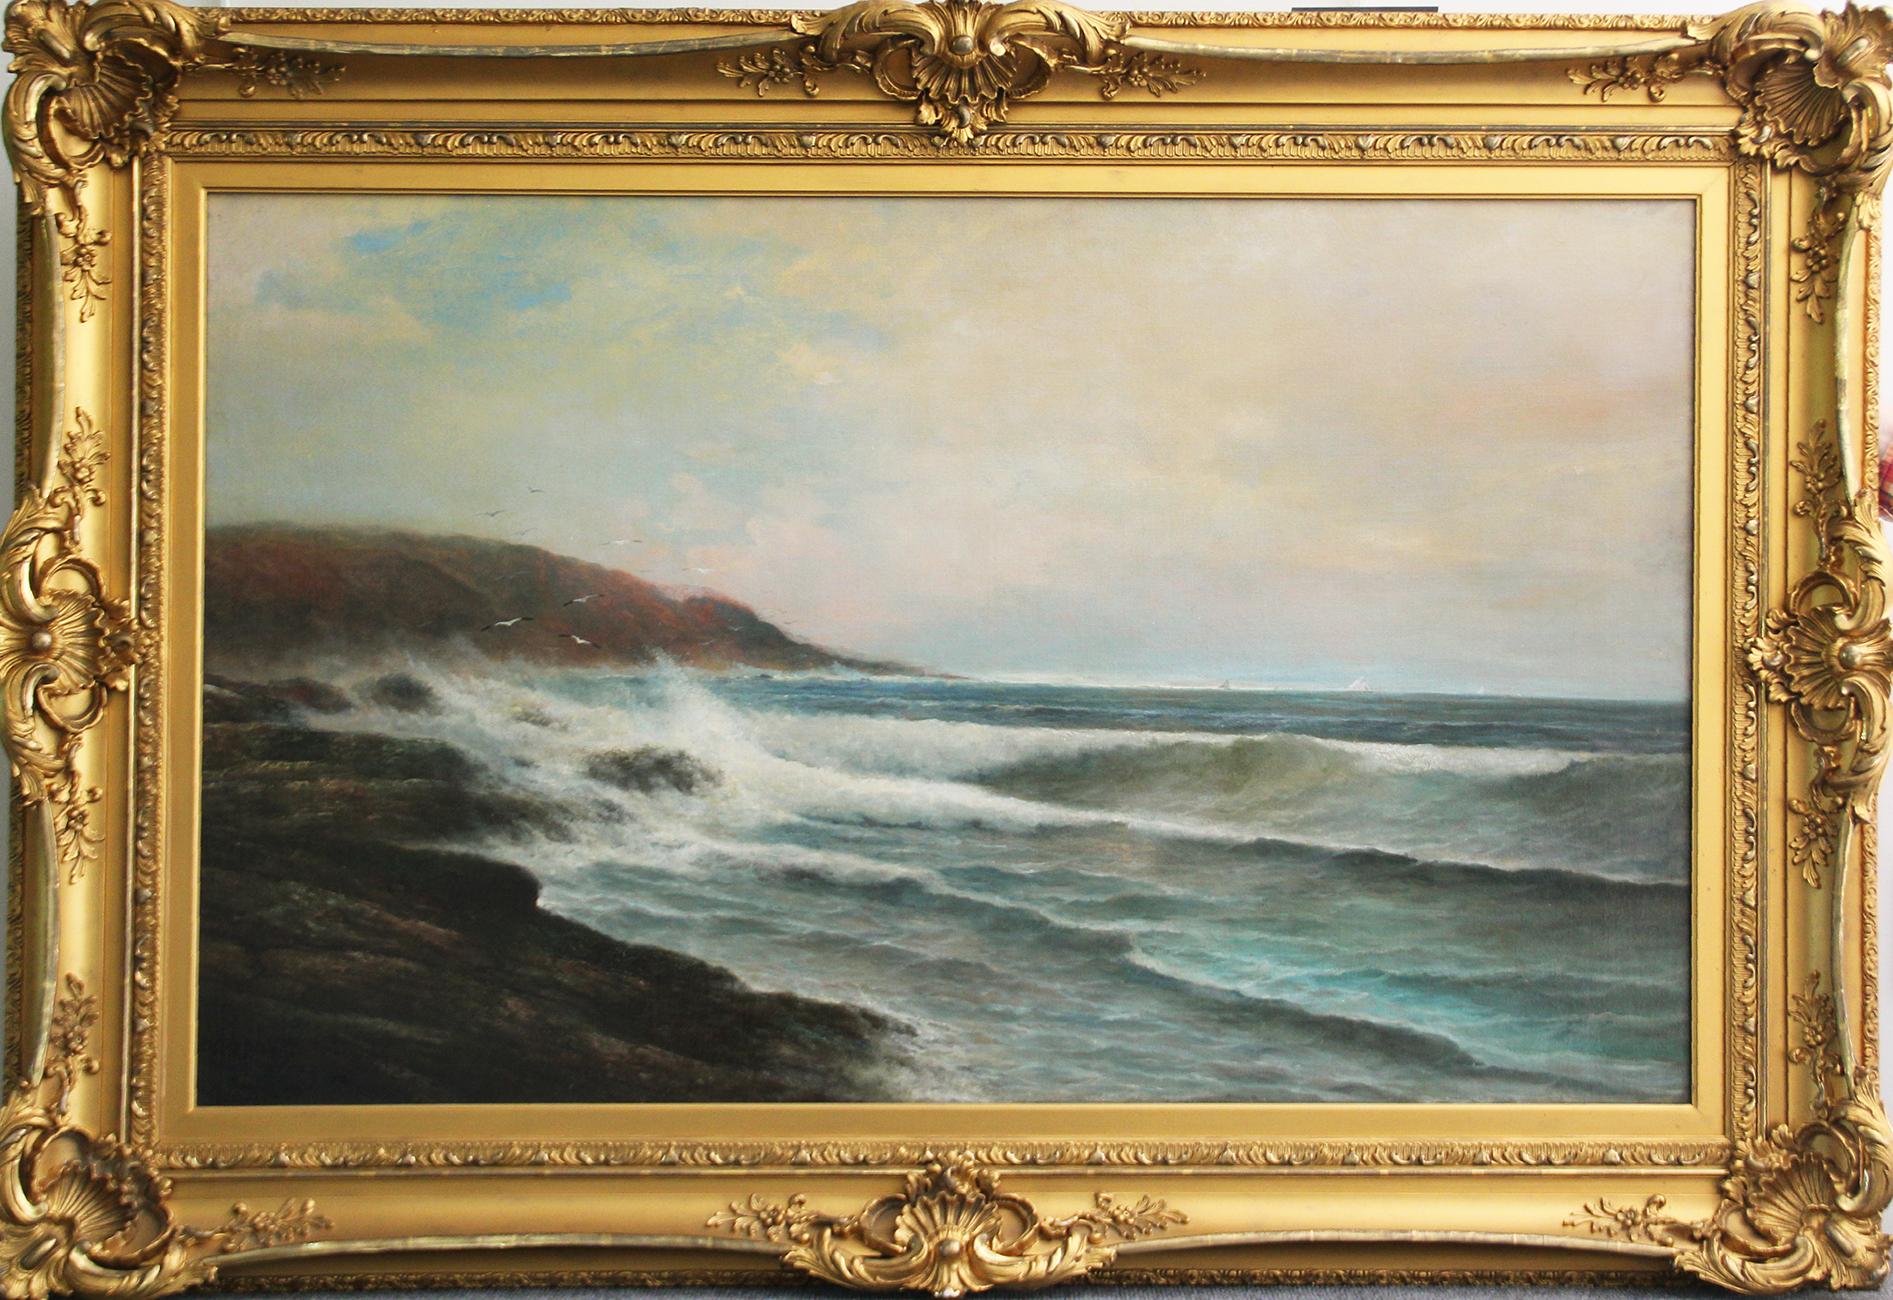 "Breakers Along the Rocky Shore, Nantasket Beach, MA" by Warren Sheppard is a 30" x 48" oil on canvas marine scene painting. It comes from the private collection of Gerry Lenfest and is Signed Lower Left "Warren Sheppard". It is framed in a period